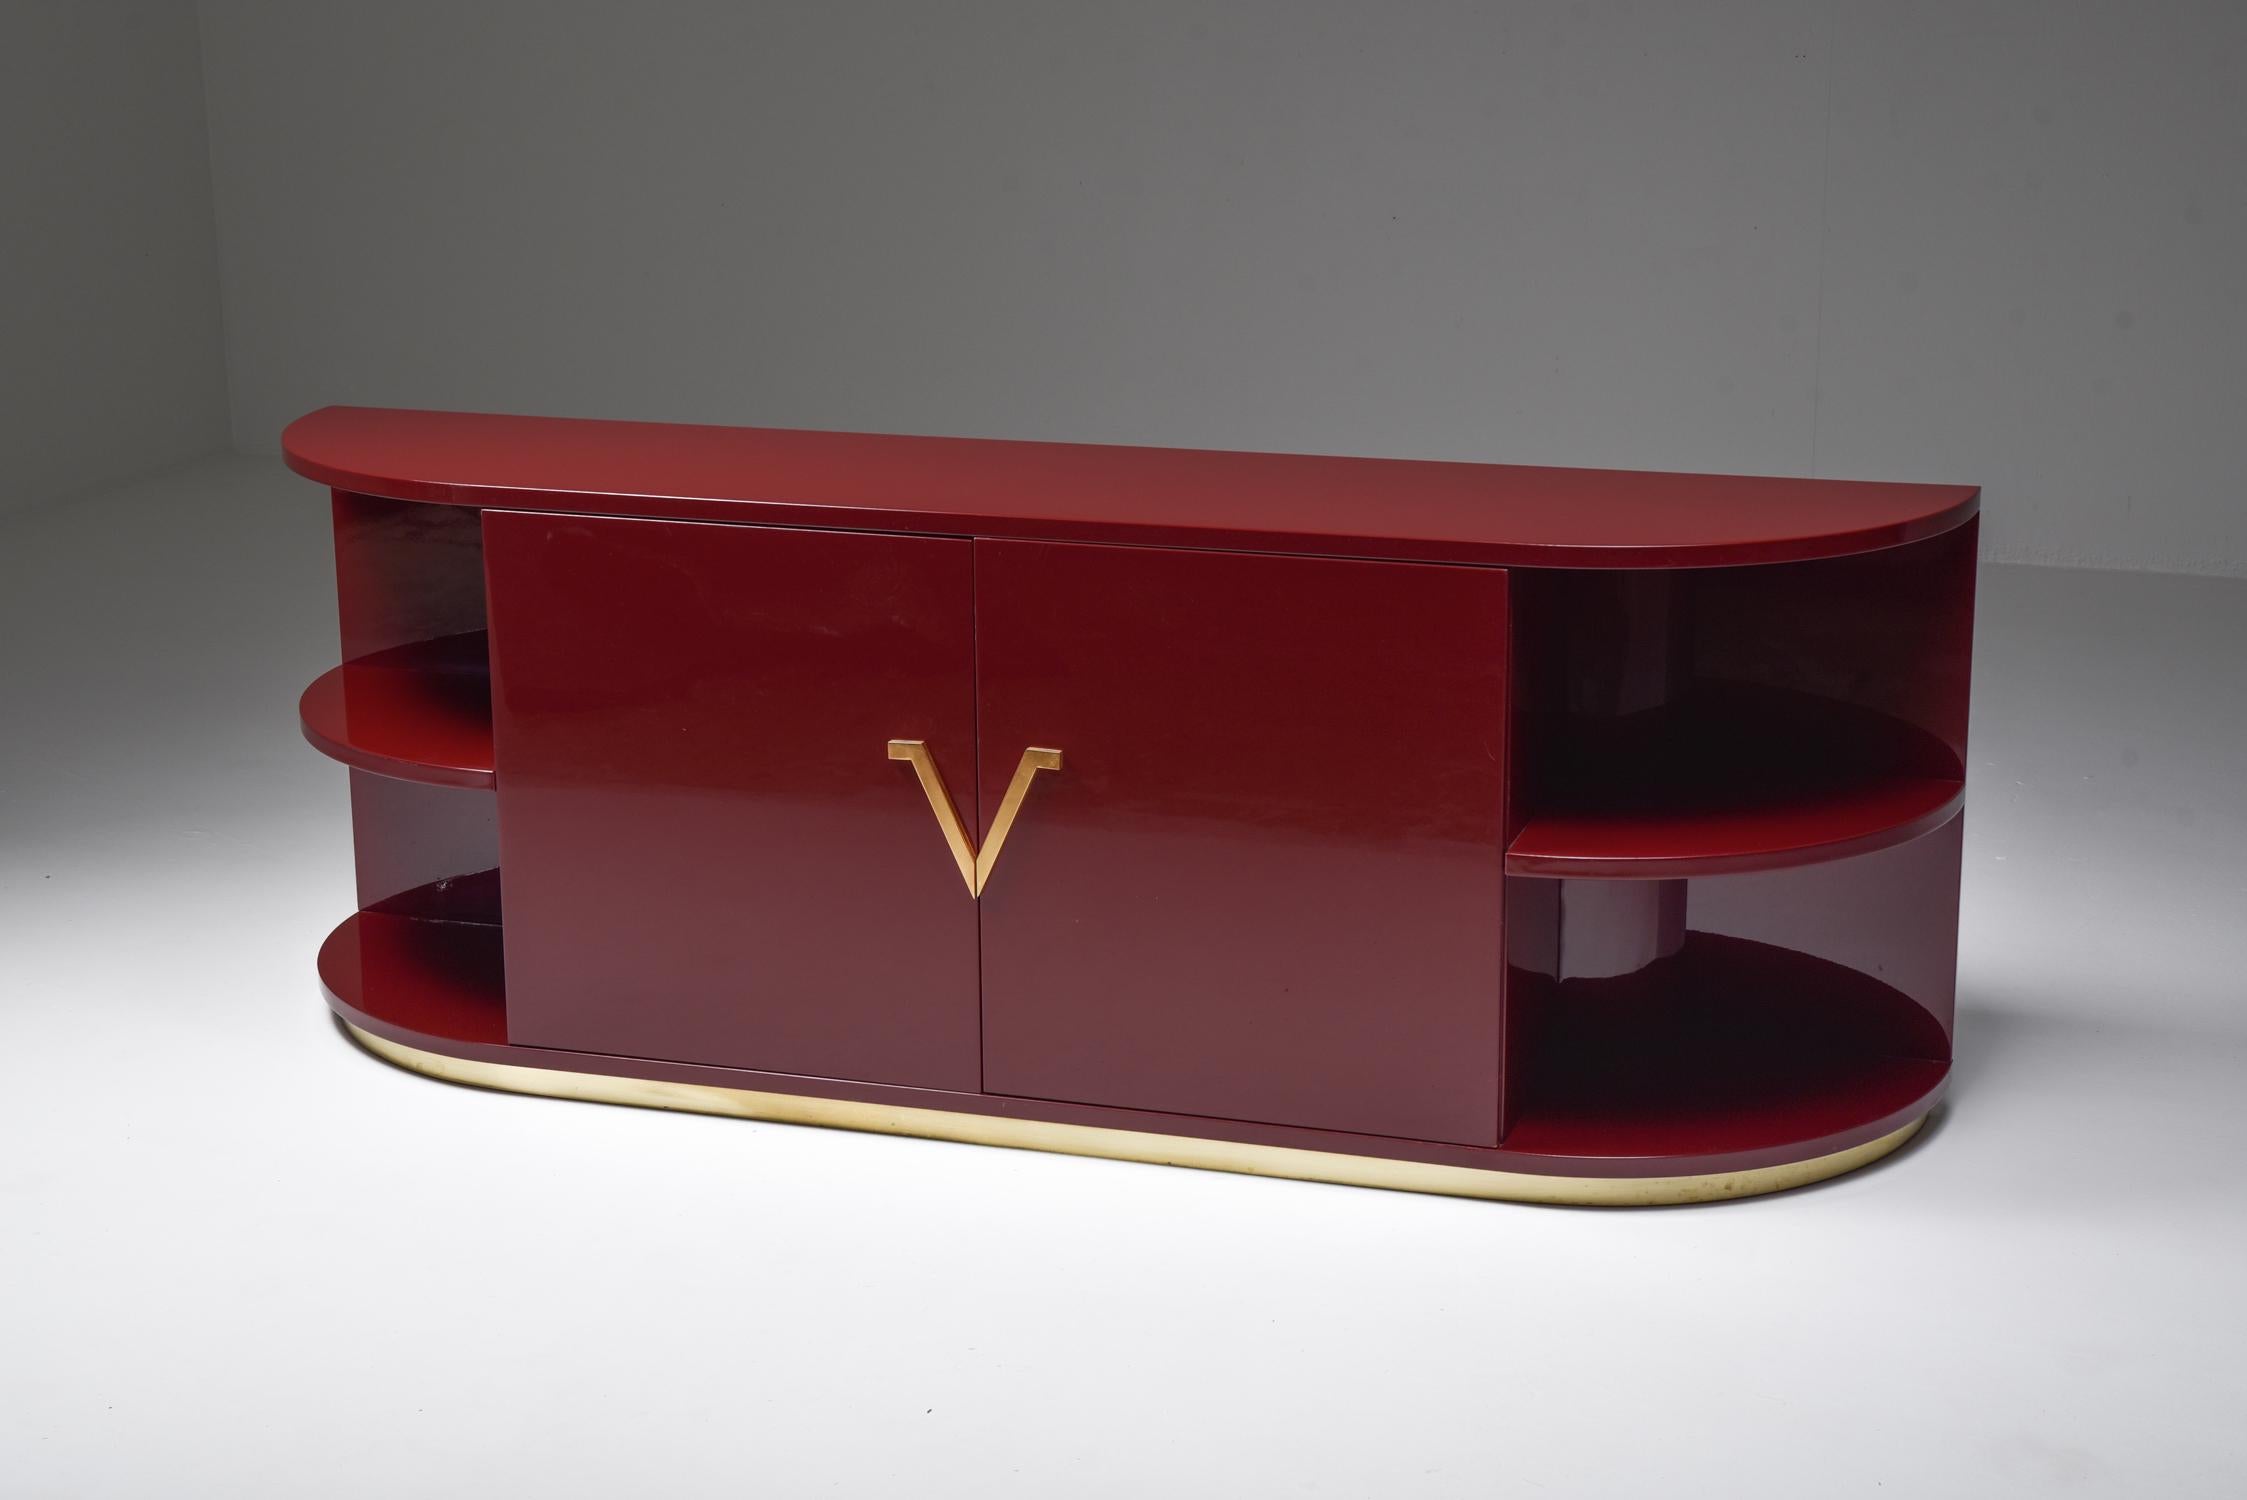 Burgundy red lacquer credenza with brass details, Italy, 1980s.

Would fit well in an eclectic chic decor inspired by Hollywood regency.
 